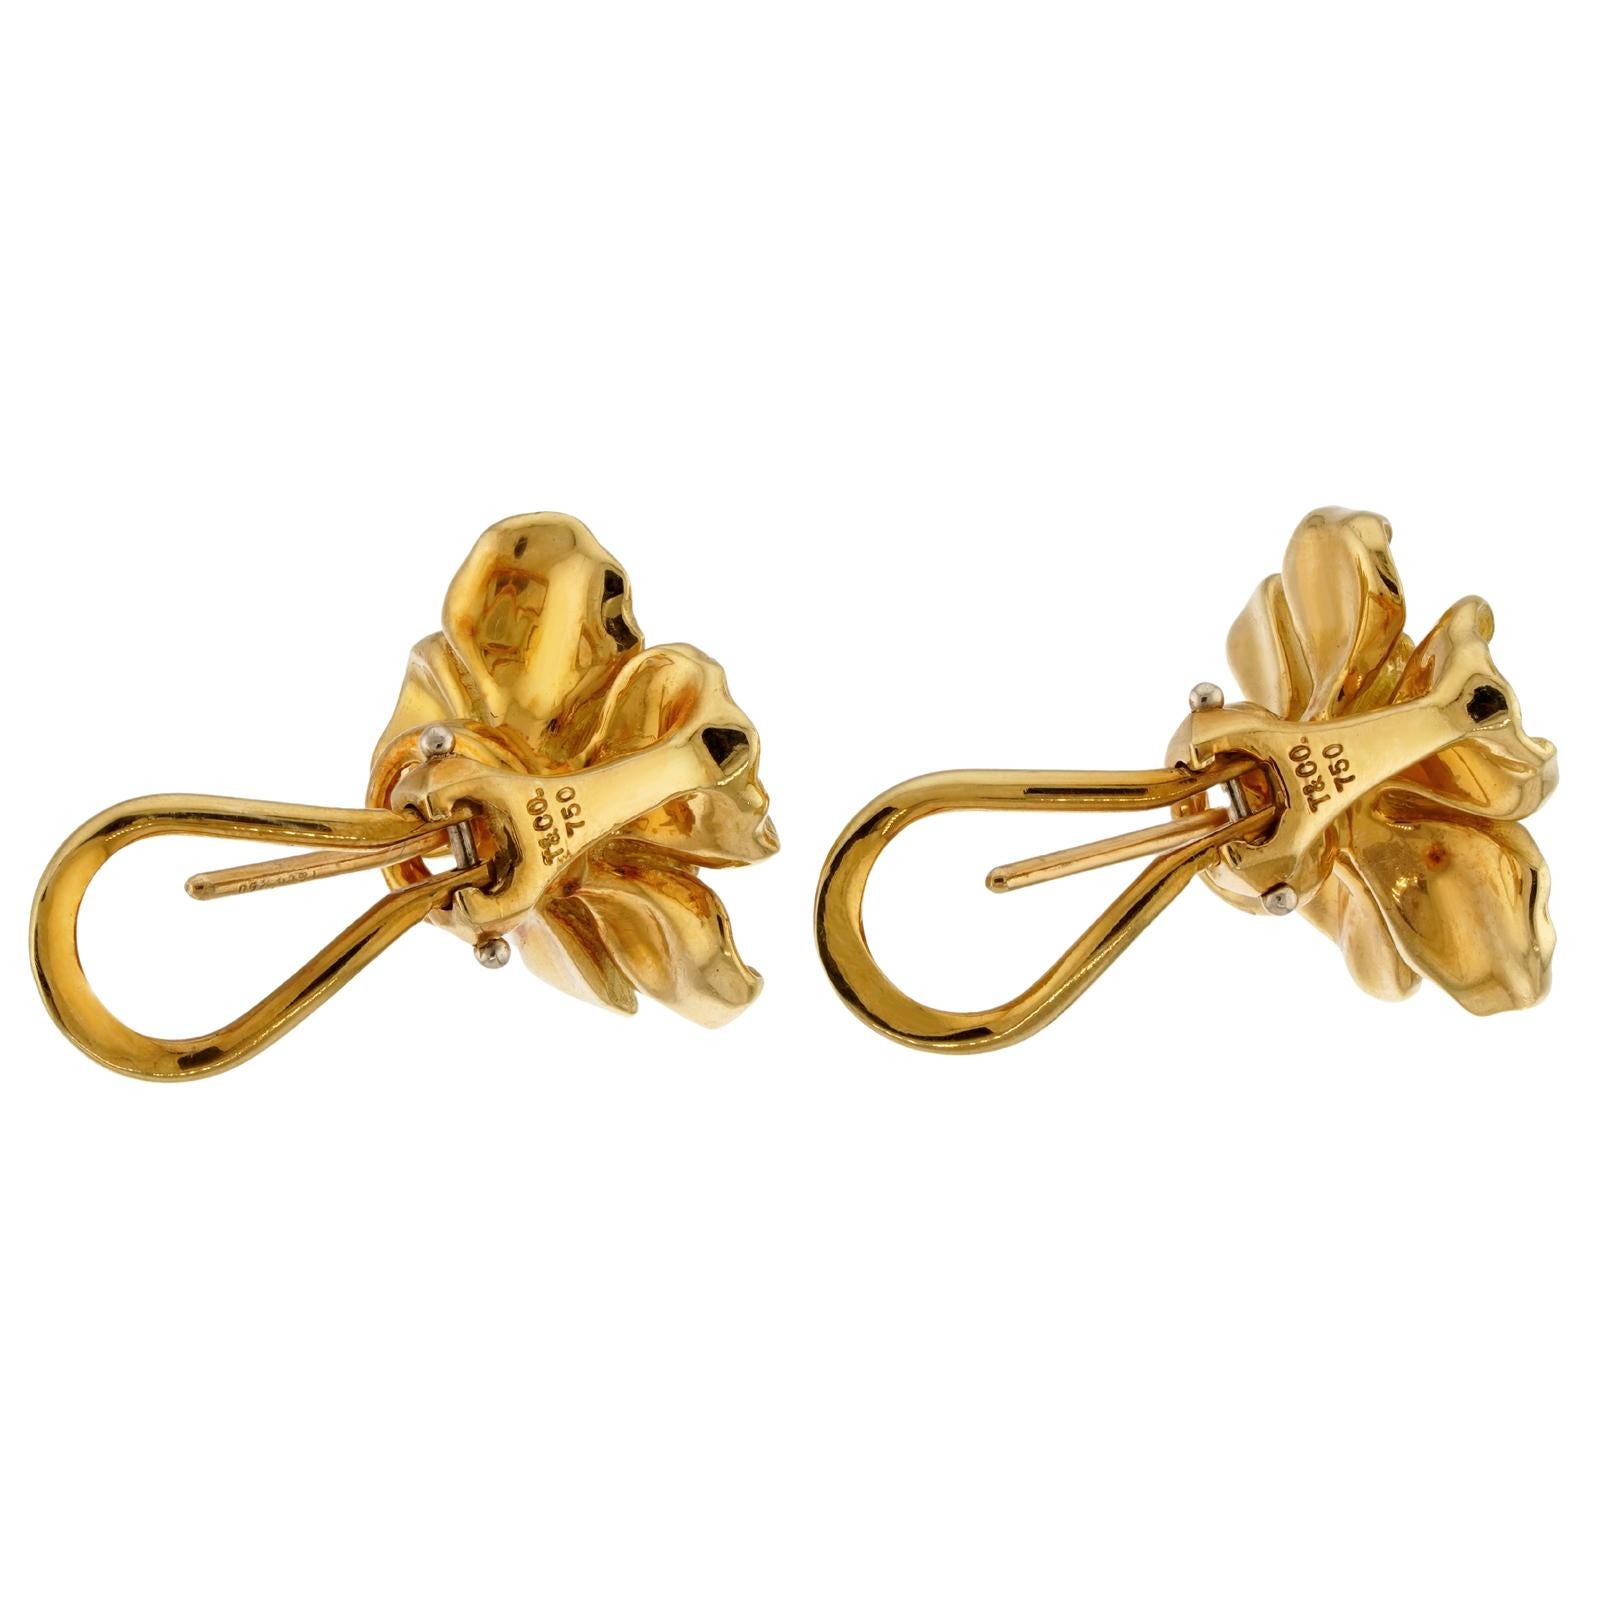 These gorgeous Tiffany clip-on earrings from the elegant floral Dogwood collection feature a wild rose flower design crafted in 18k yellow gold. Made in United States circa 1980s. Measurements: 0.62